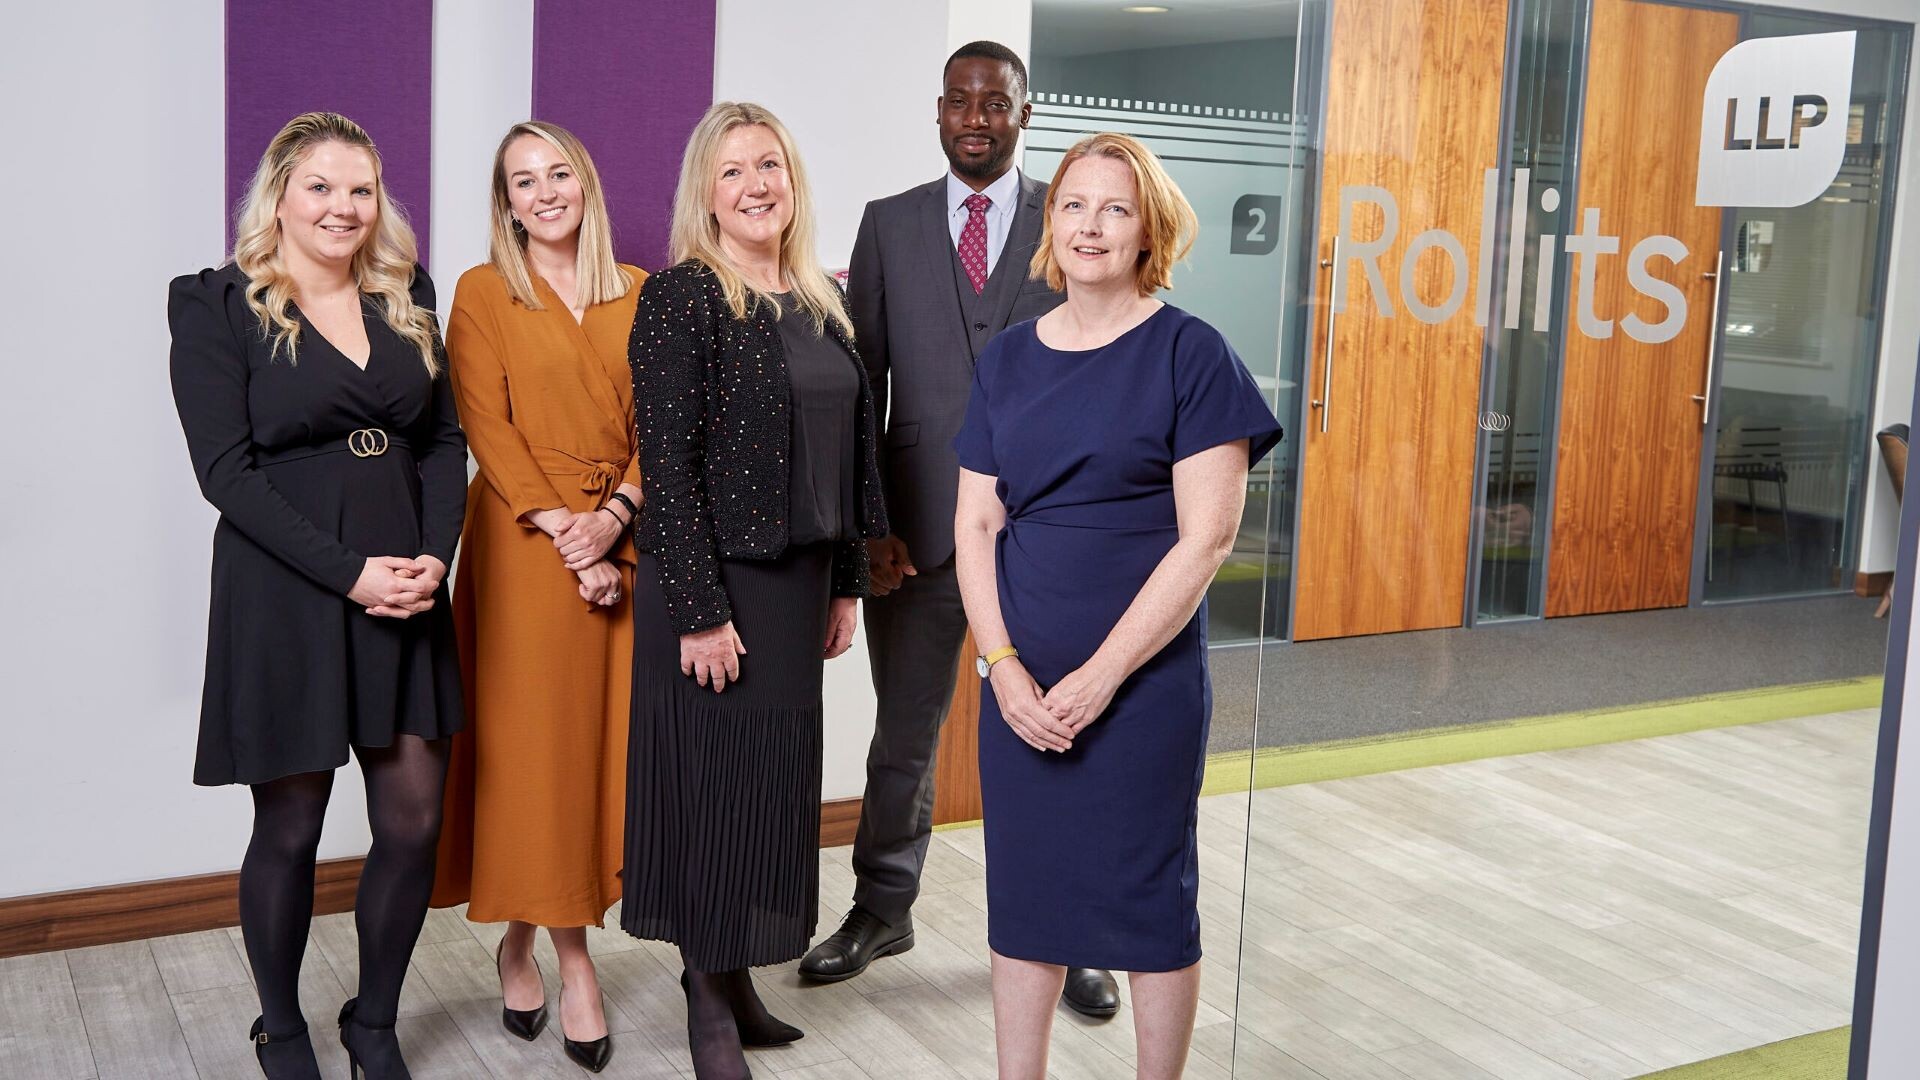 Leading law firm Rollits LLP has announced the promotion of five members of its team from the Hull and York offices from Associate to Partner.